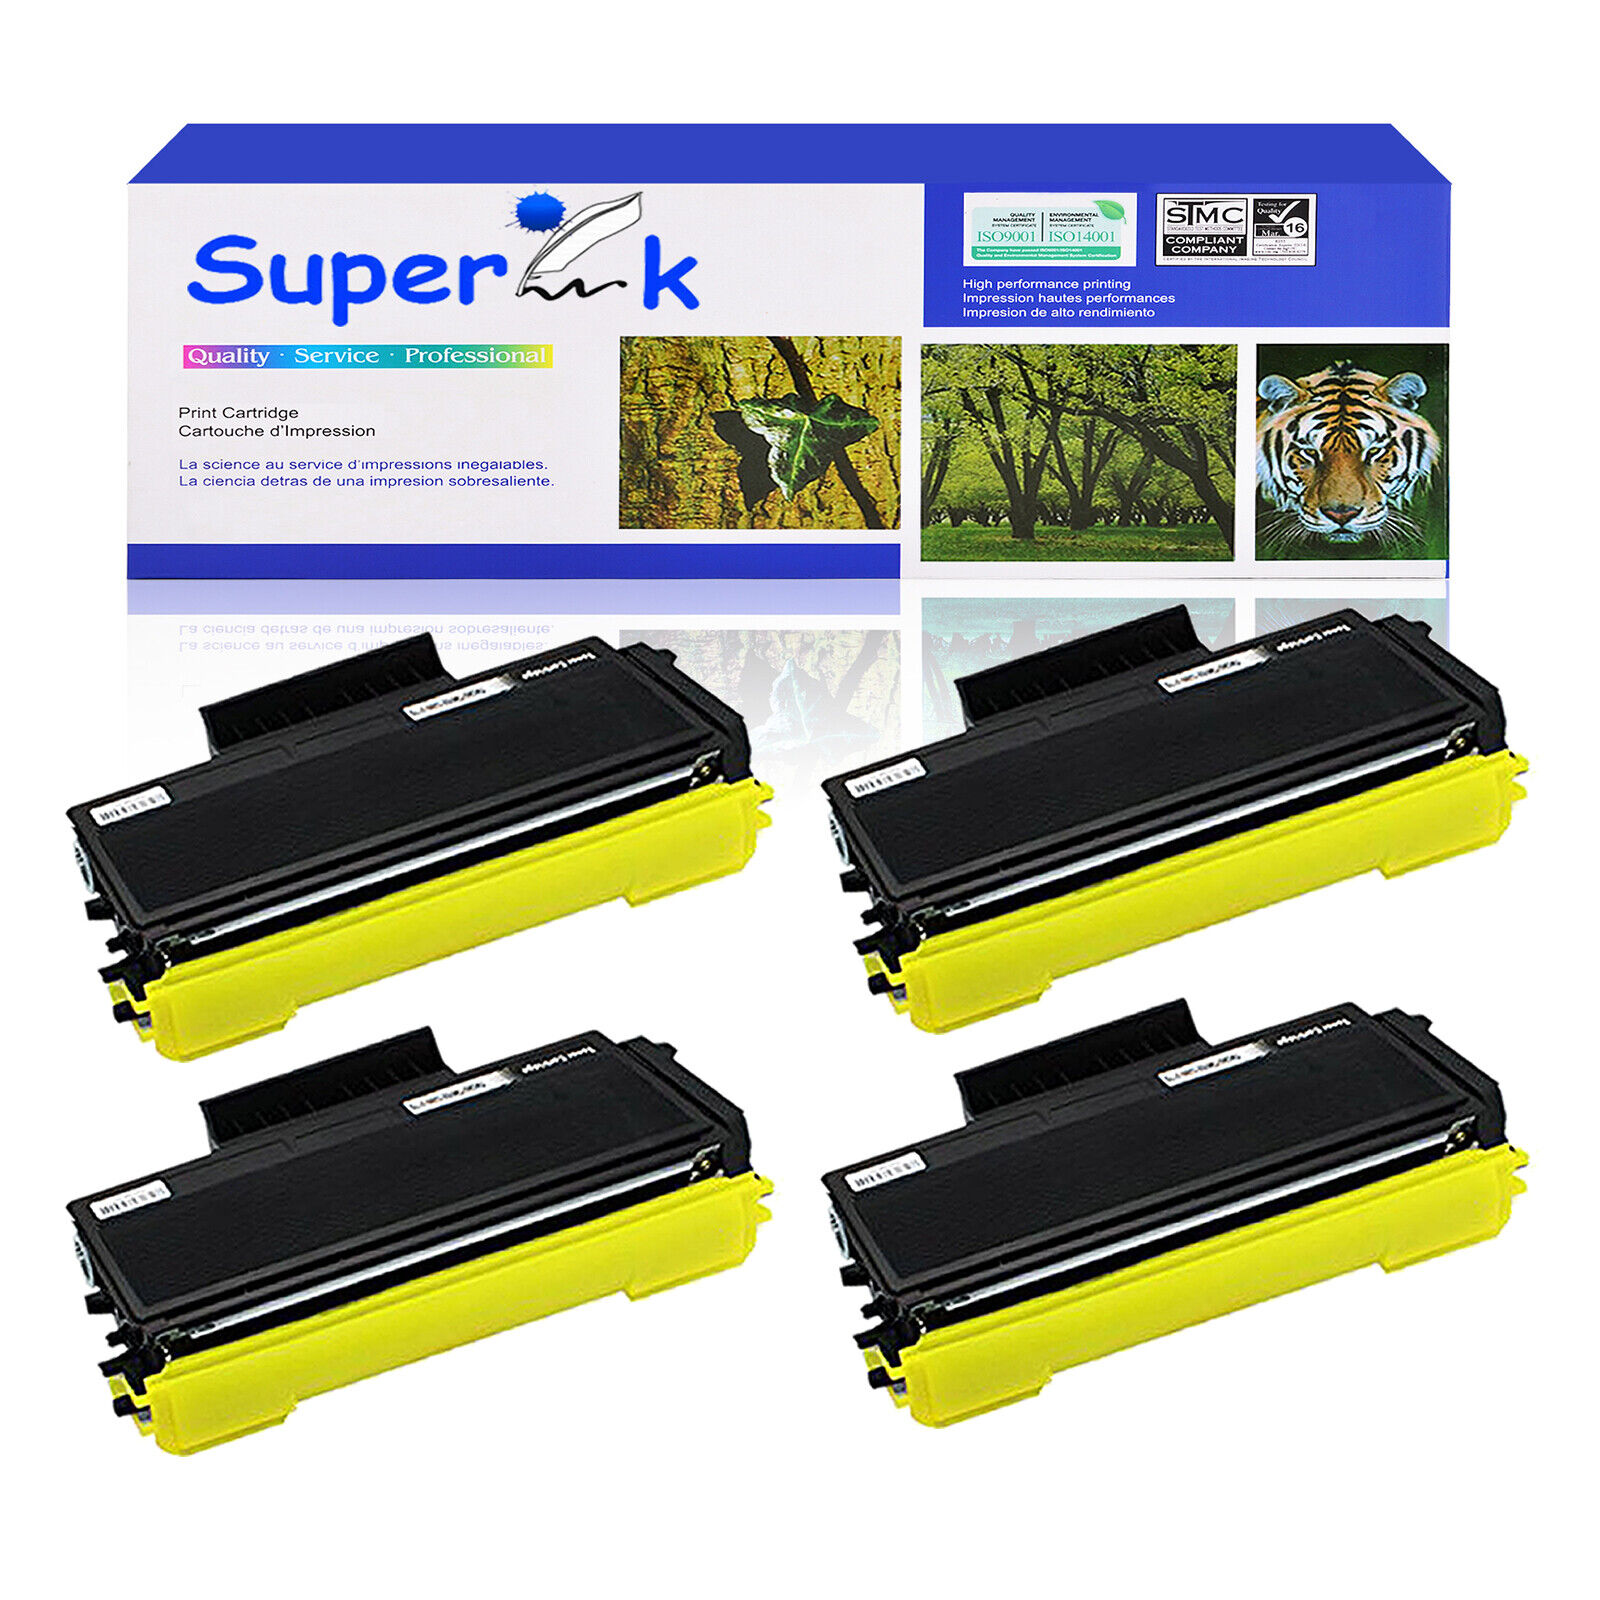 4PK TN580 Toner Cartridge for Brother TN-580 MFC-8460N DCP-8060 HL-5280 5270DN